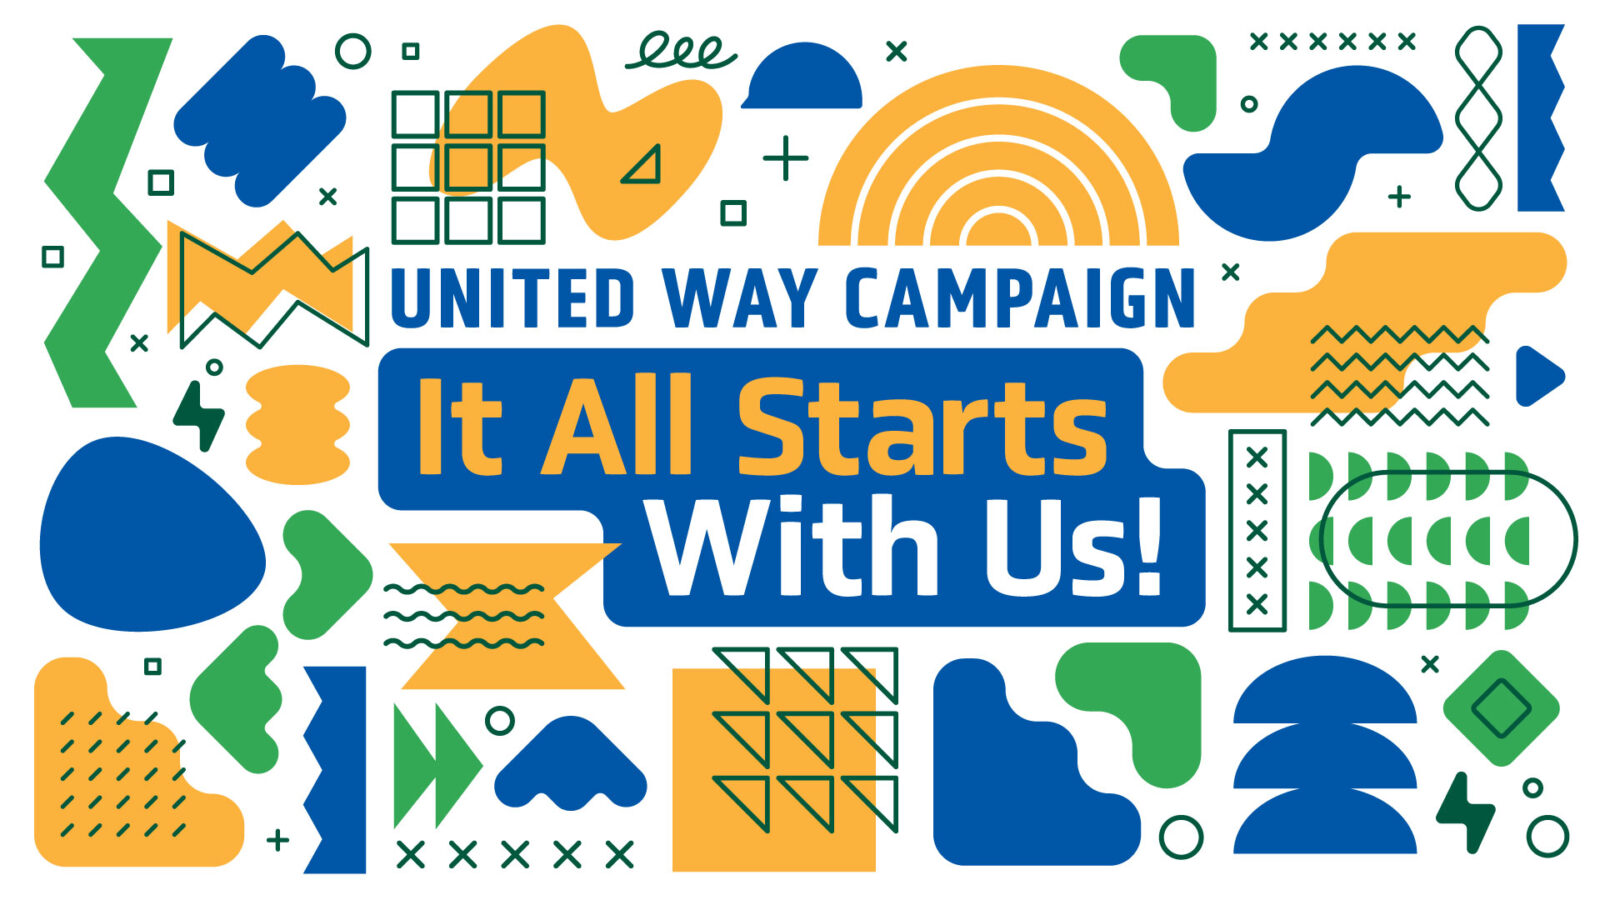 A graphic for the United Way Campaign.